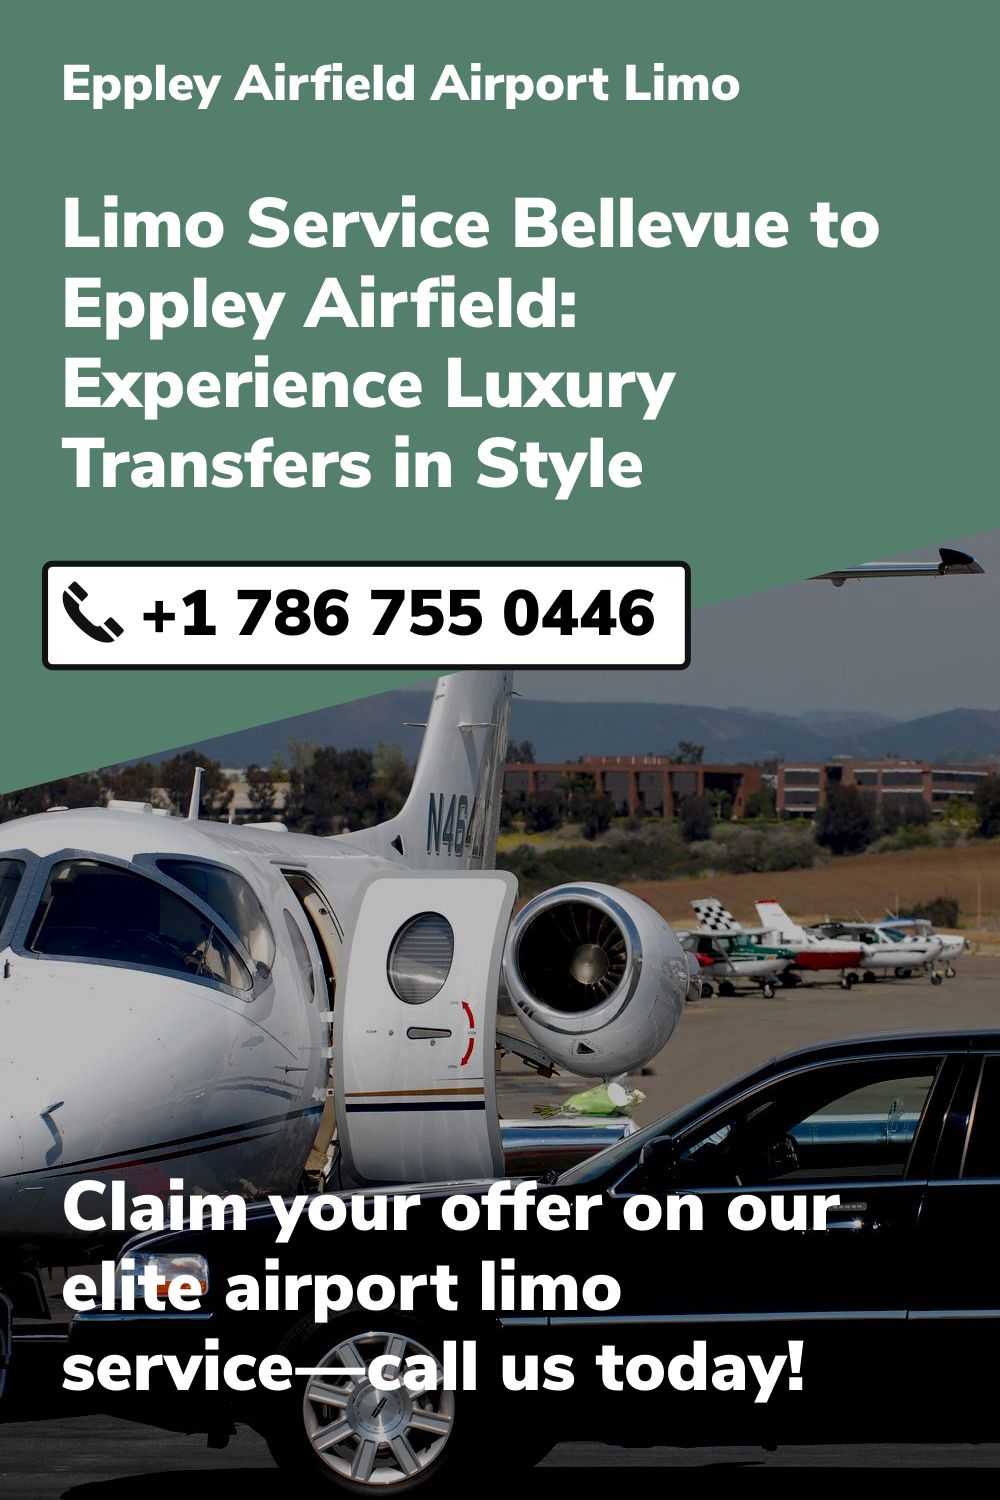 Eppley Airfield Airport Limo